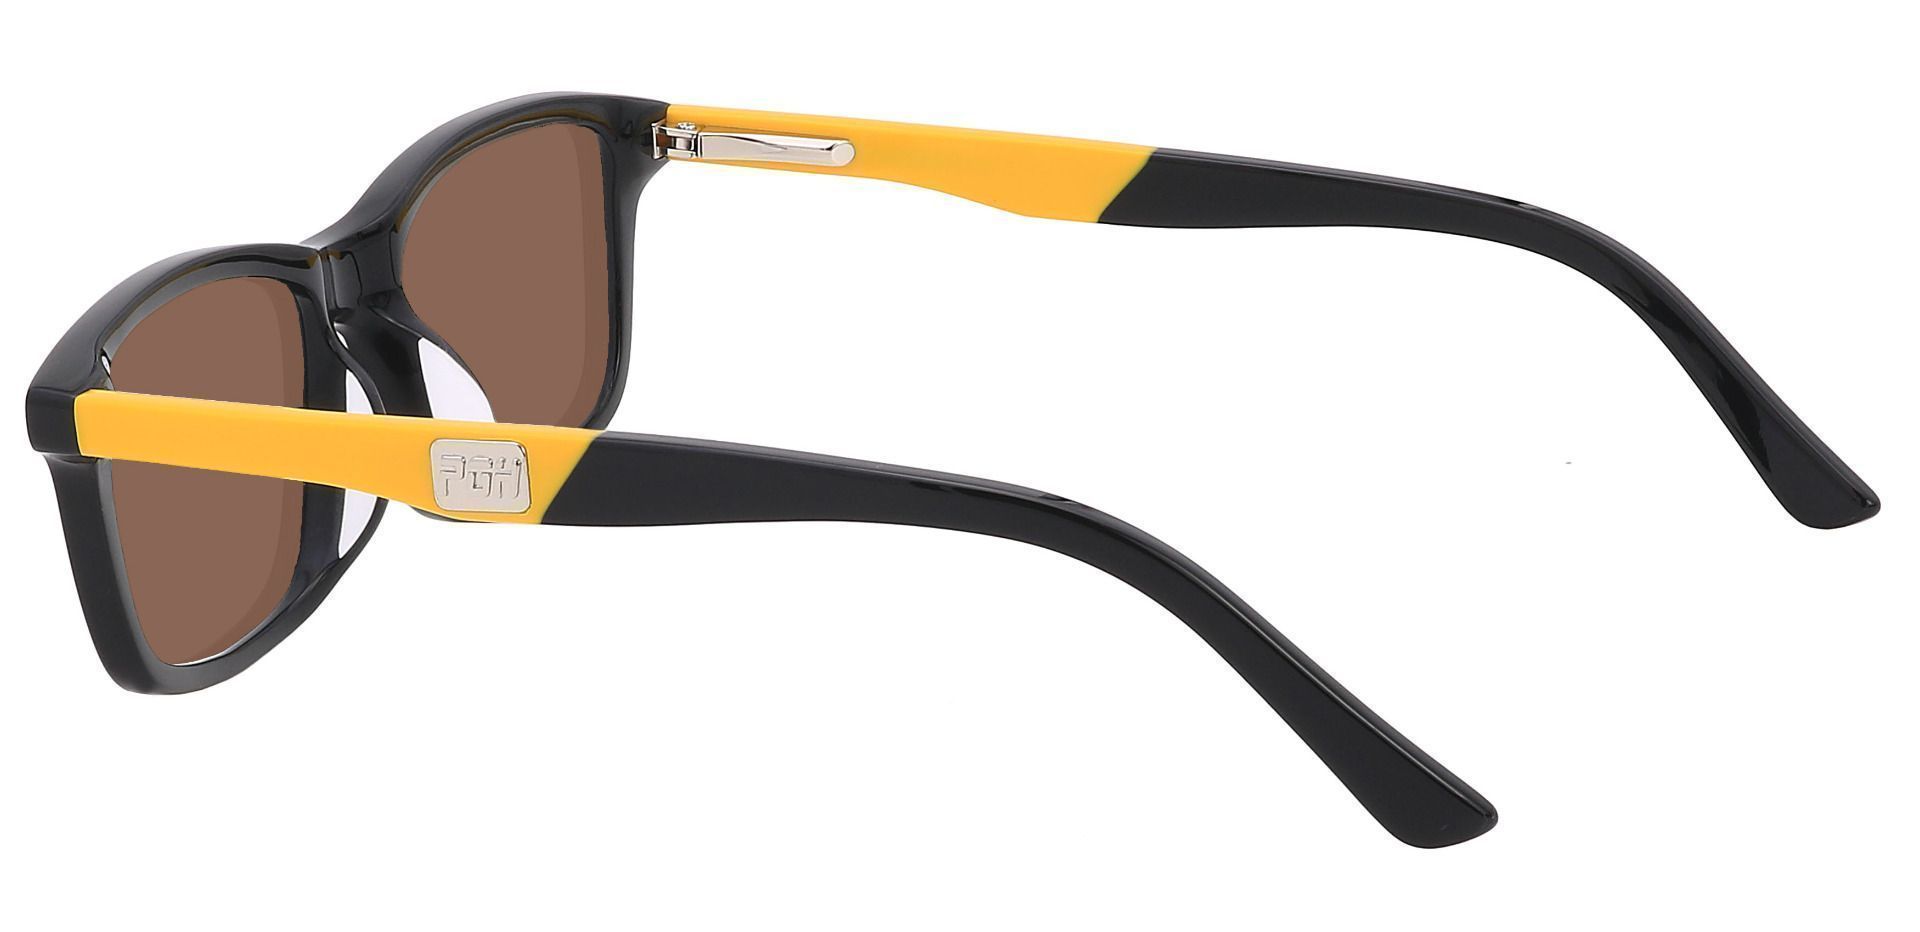 Allegheny Rectangle Non-Rx Sunglasses - Black Frame With Brown Lenses